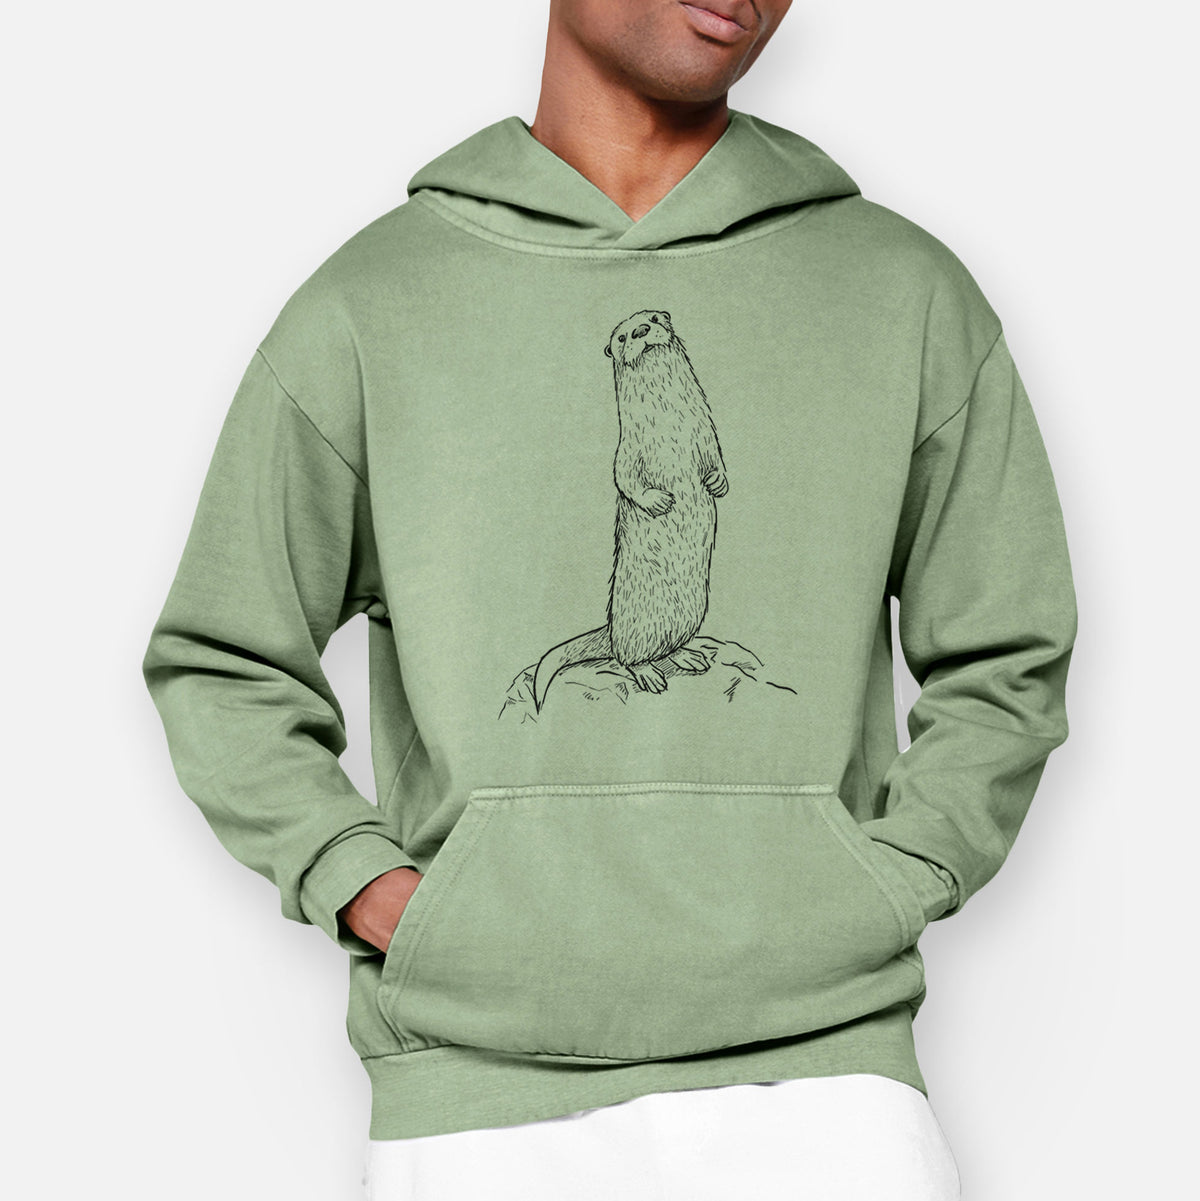 North American River Otter - Lontra canadensis  - Urban Heavyweight Hoodie